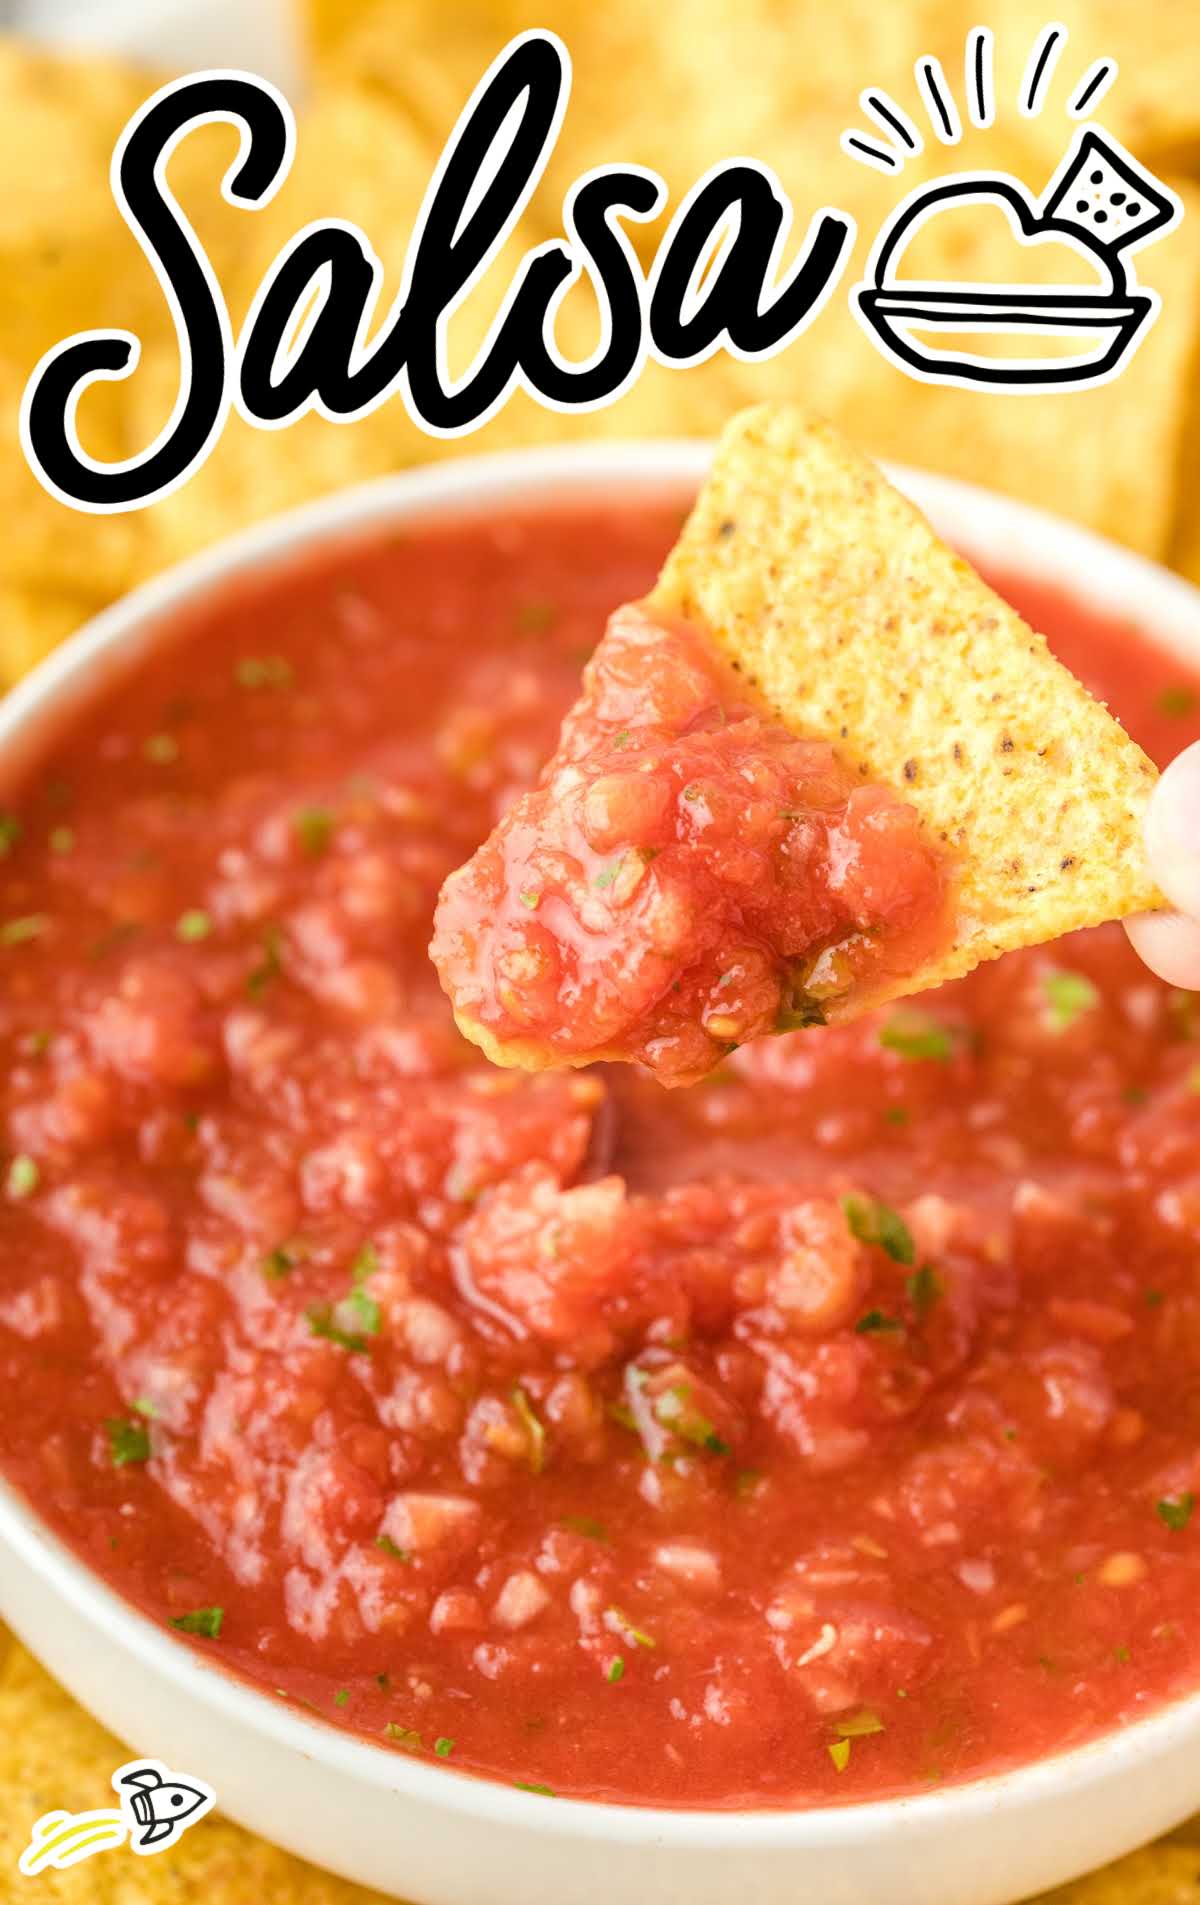 close up shot of a bowl of salsa with a tortilla chip being dipped into it